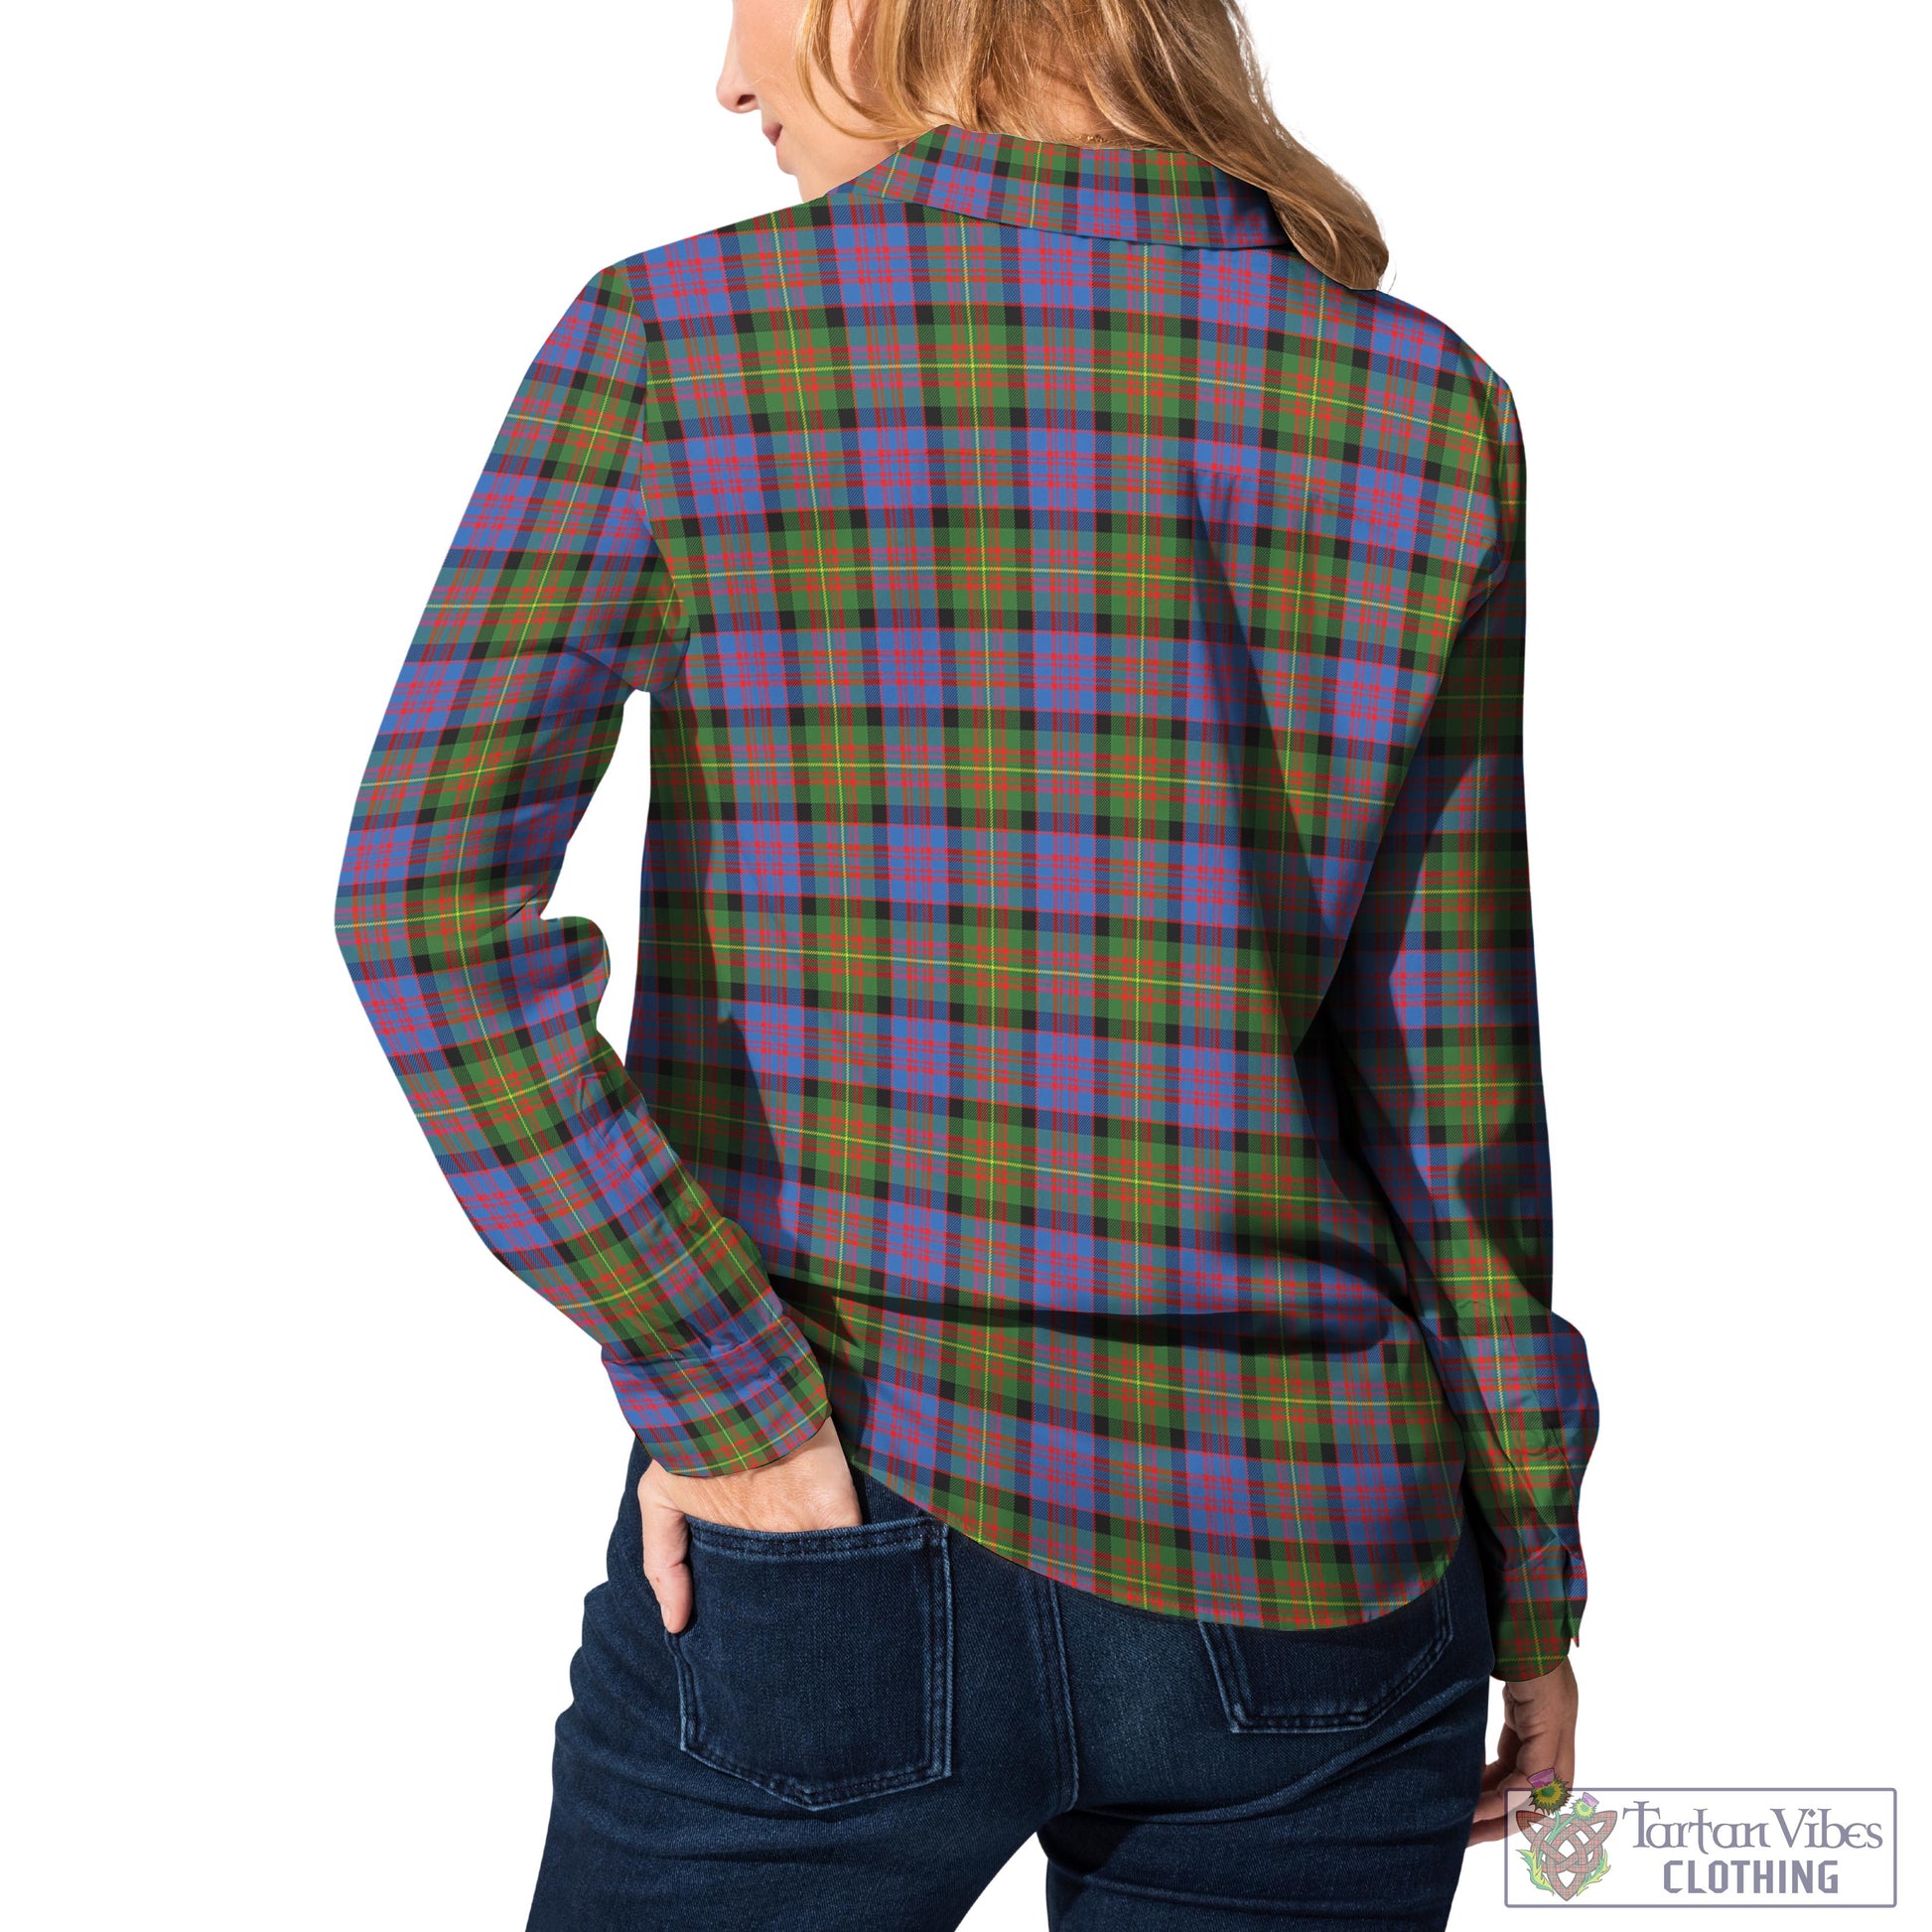 Tartan Vibes Clothing Carnegie Ancient Tartan Womens Casual Shirt with Family Crest